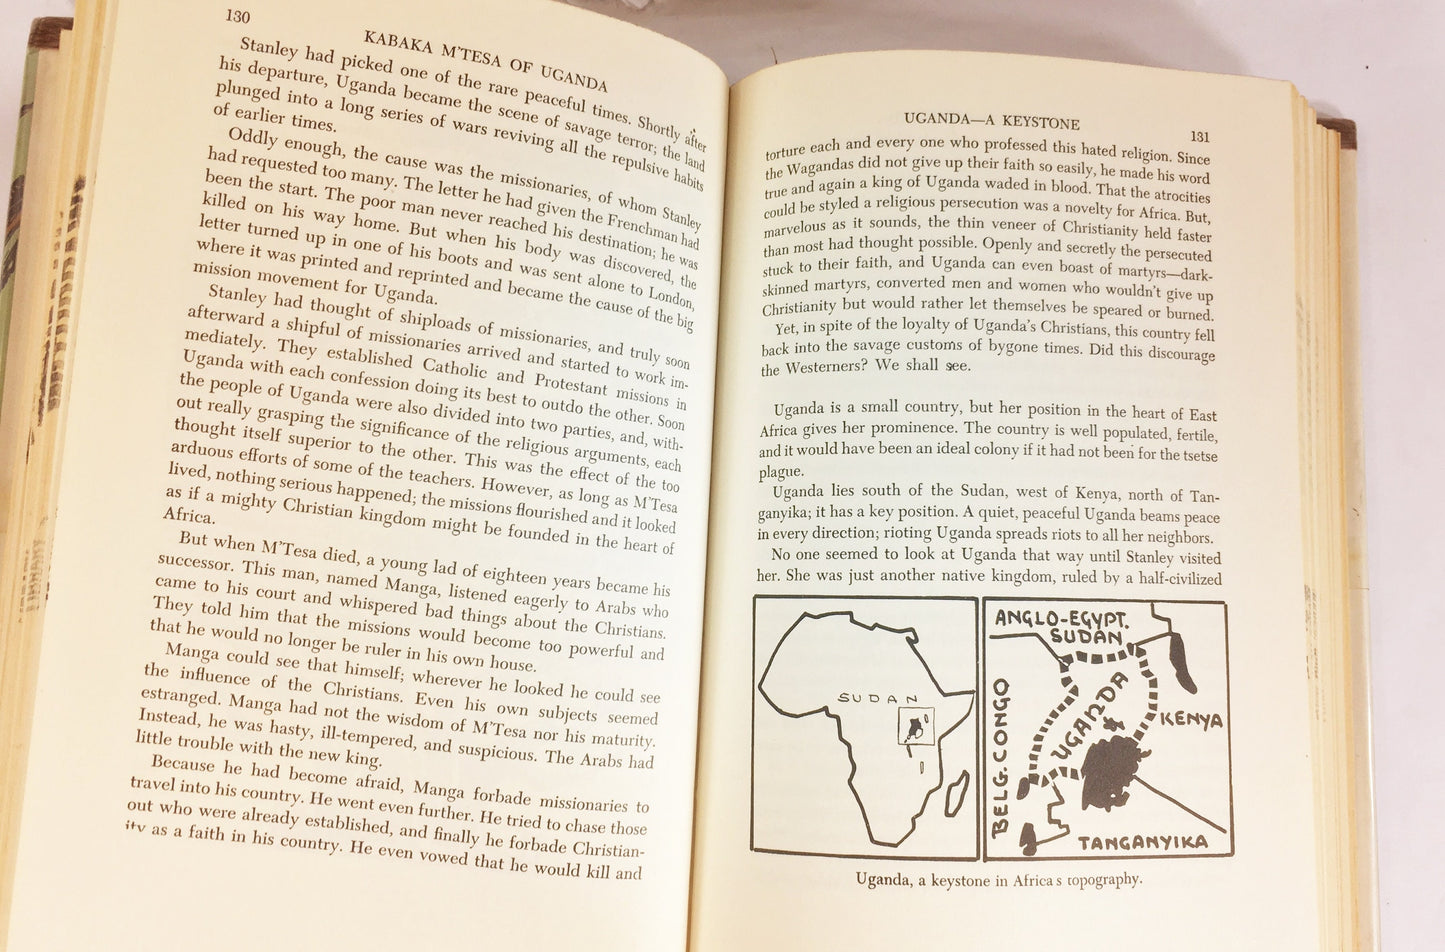 Stanley's Africa Vintage young adult book about discovery and exploration circa 1959 by Busoni. Viking Press